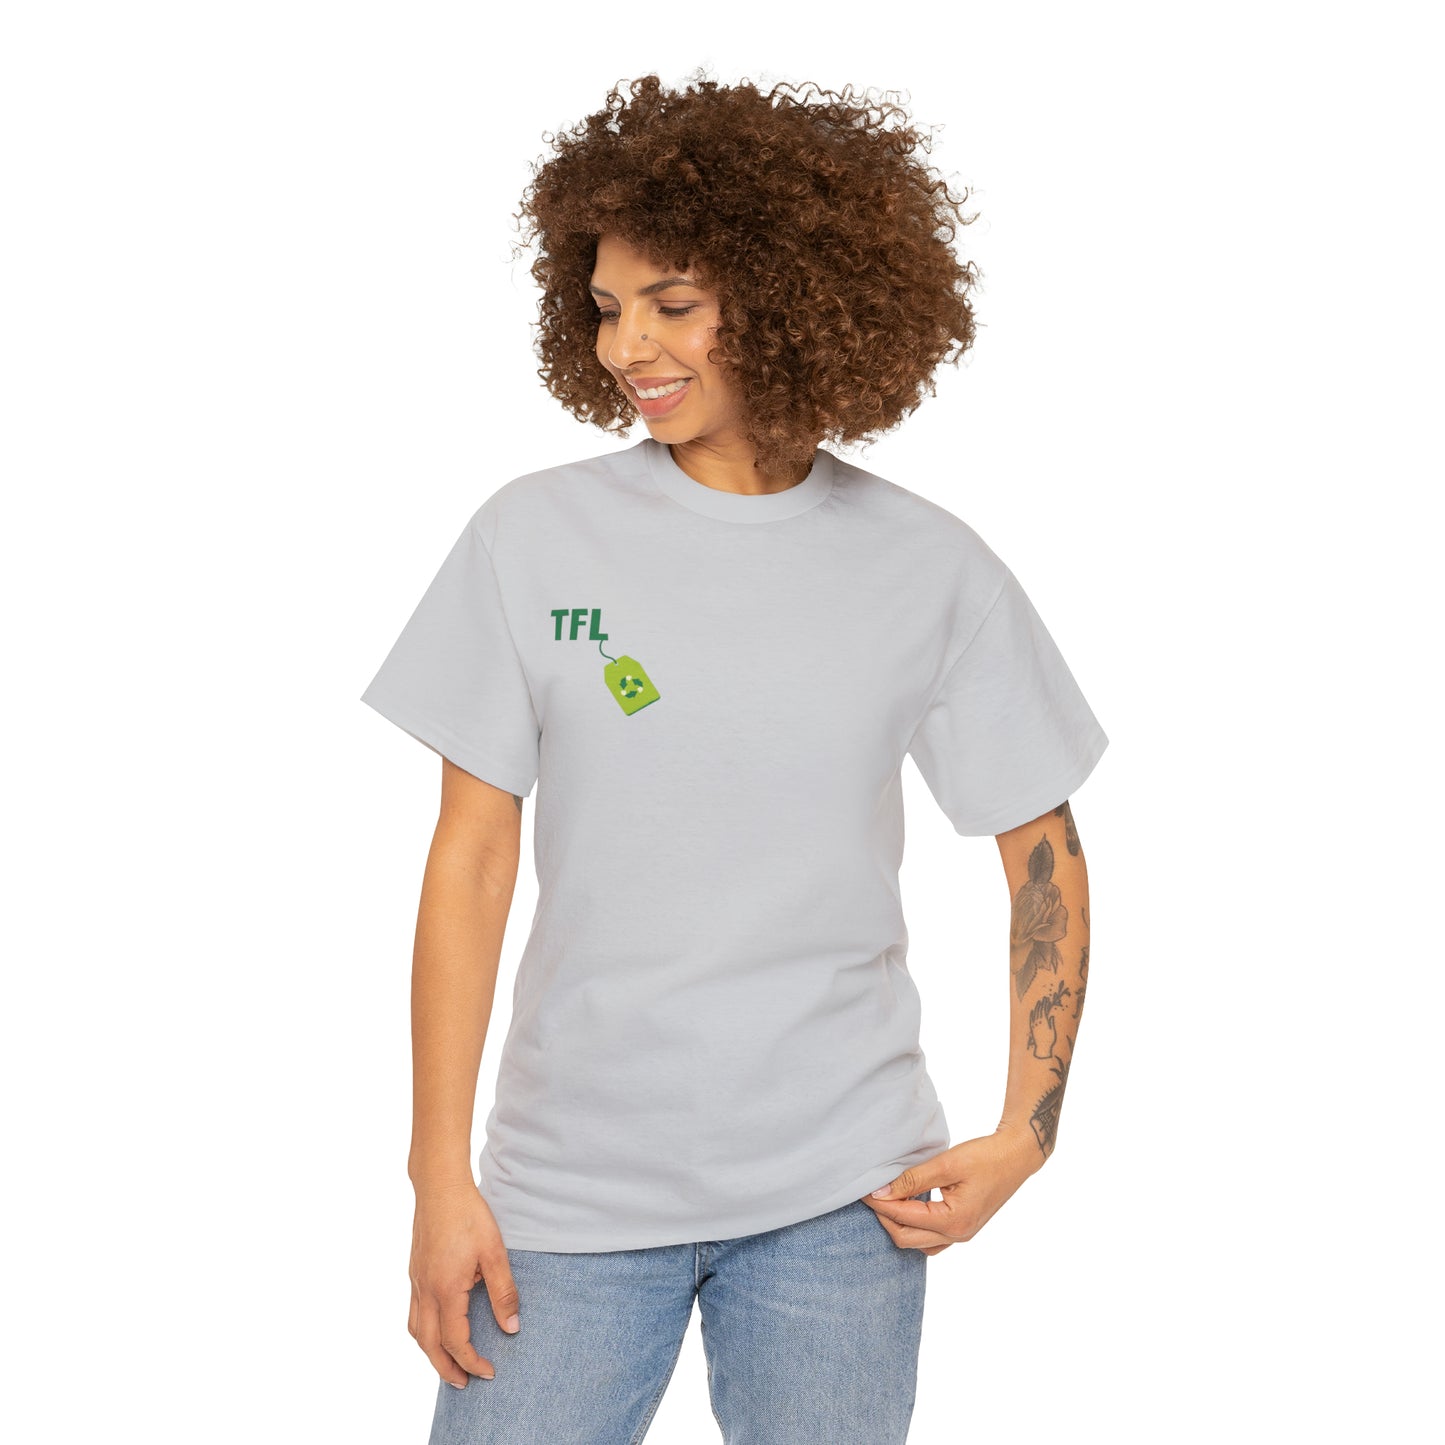 Thrifter for Life Unisex Heavy Cotton Tee